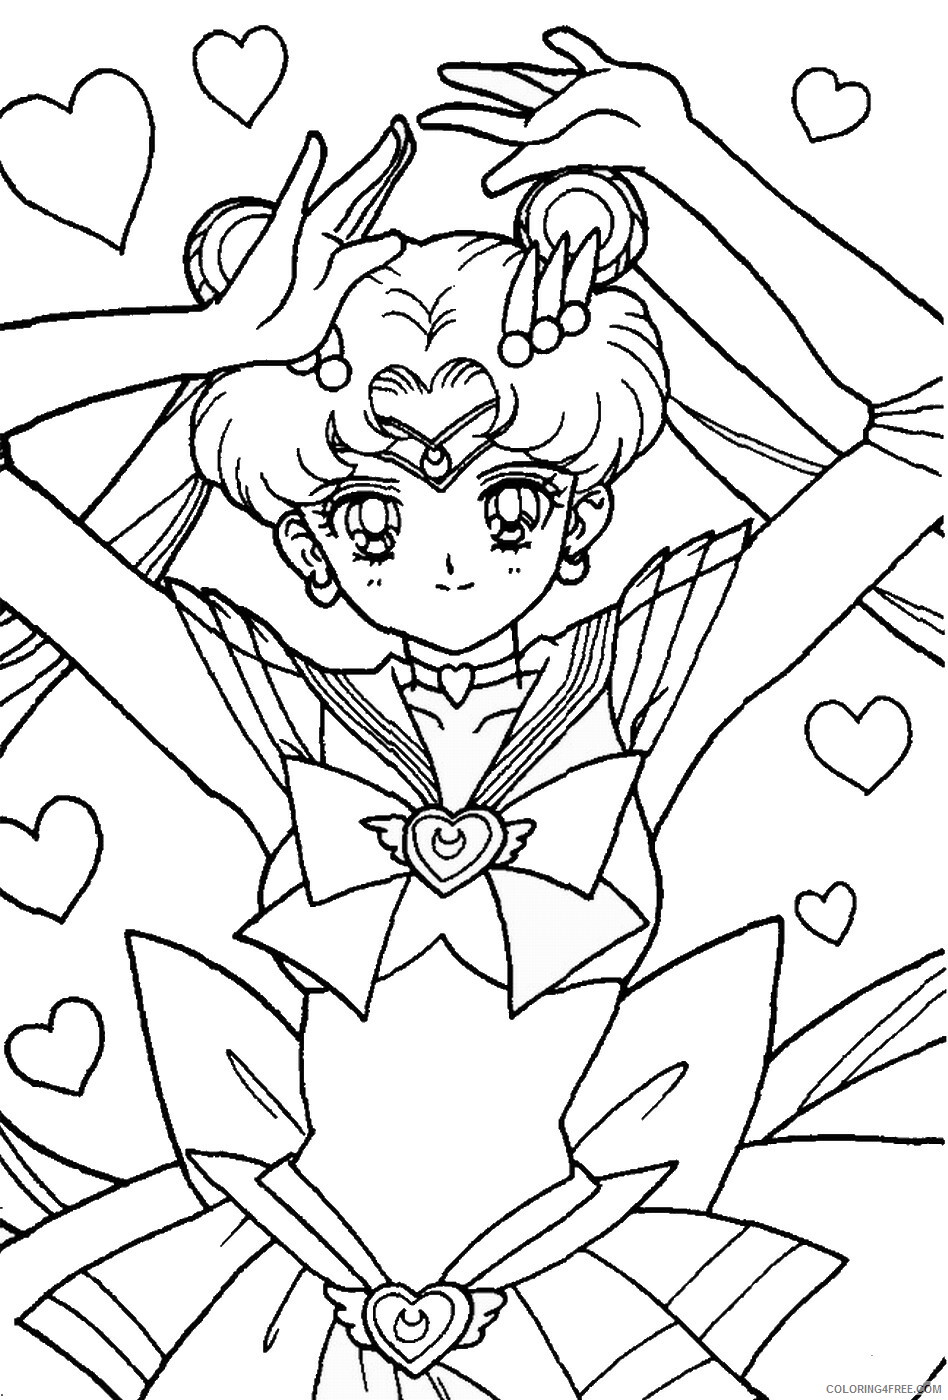 Sailor Moon Printable Coloring Pages Anime sailor_moon_cl44 2021 0980 Coloring4free